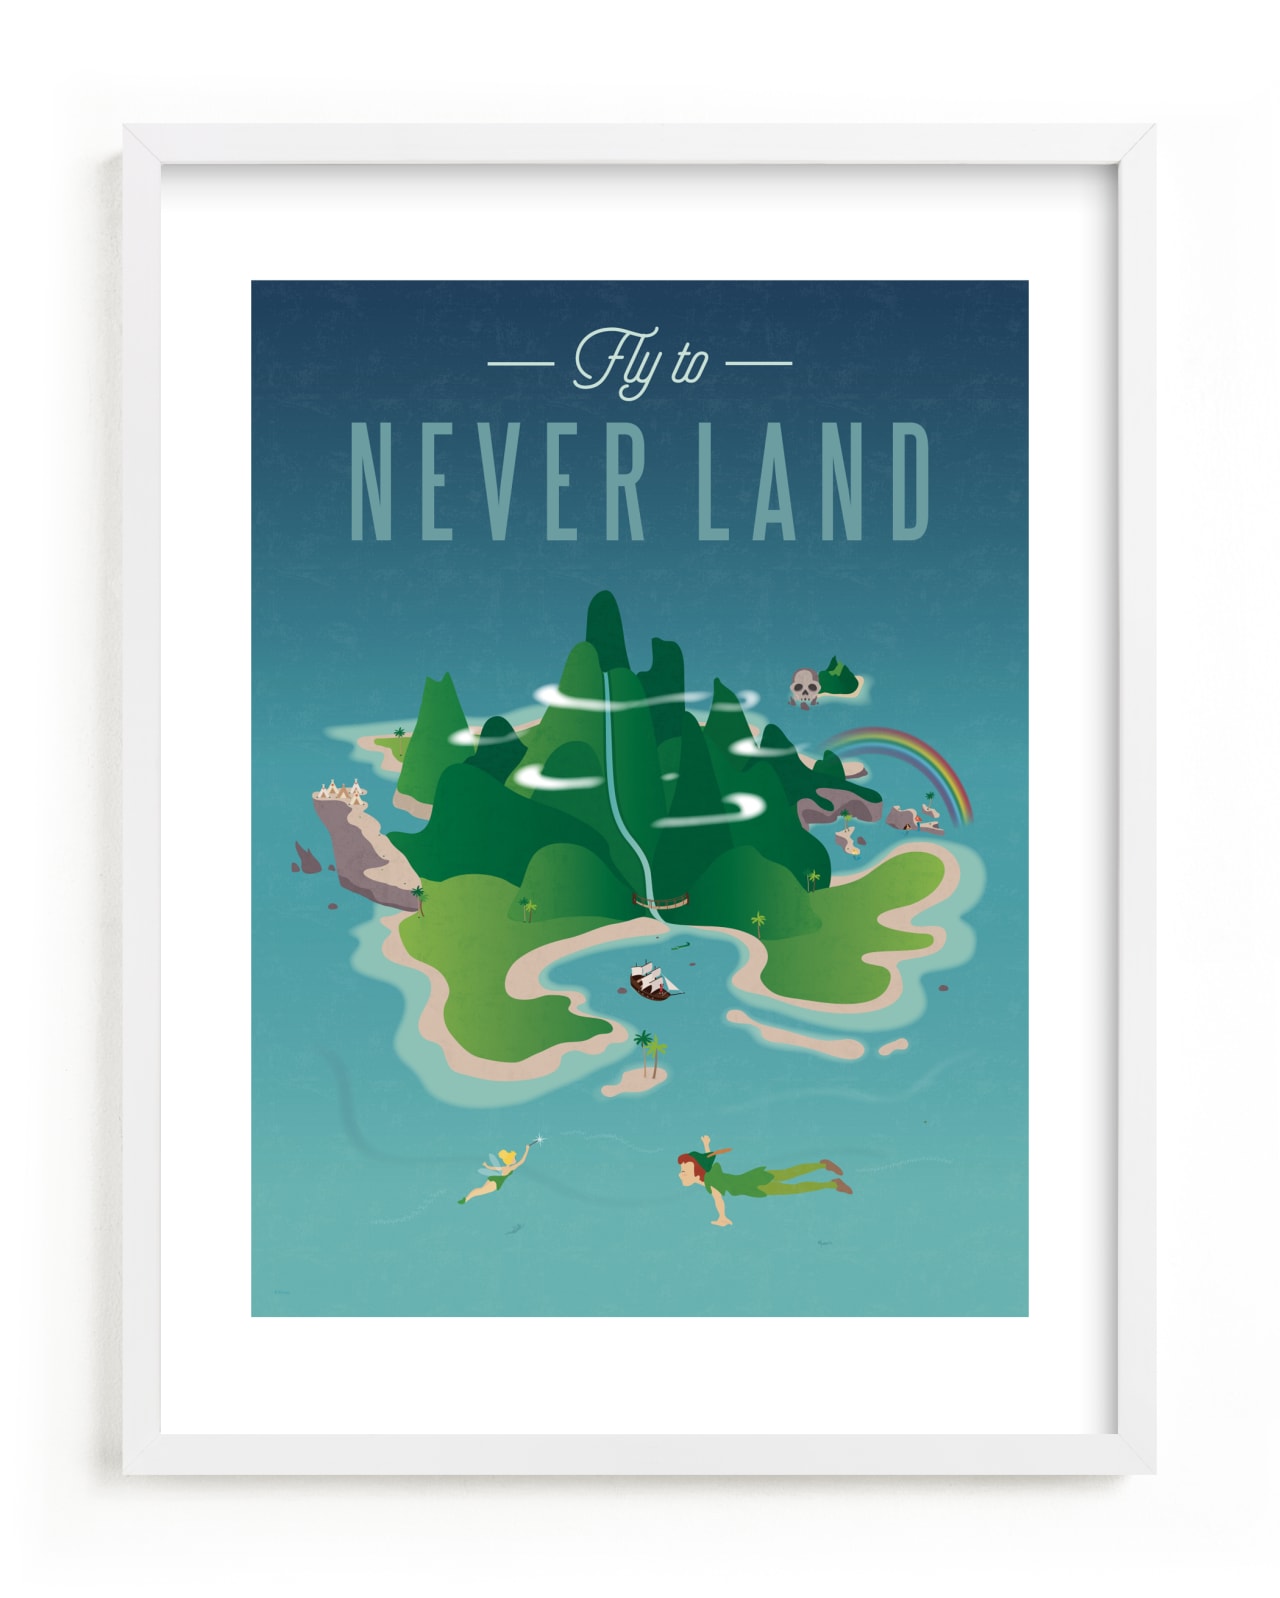 This is a blue disney art by Erica Krystek called Fly To Neverland | Peter Pan.